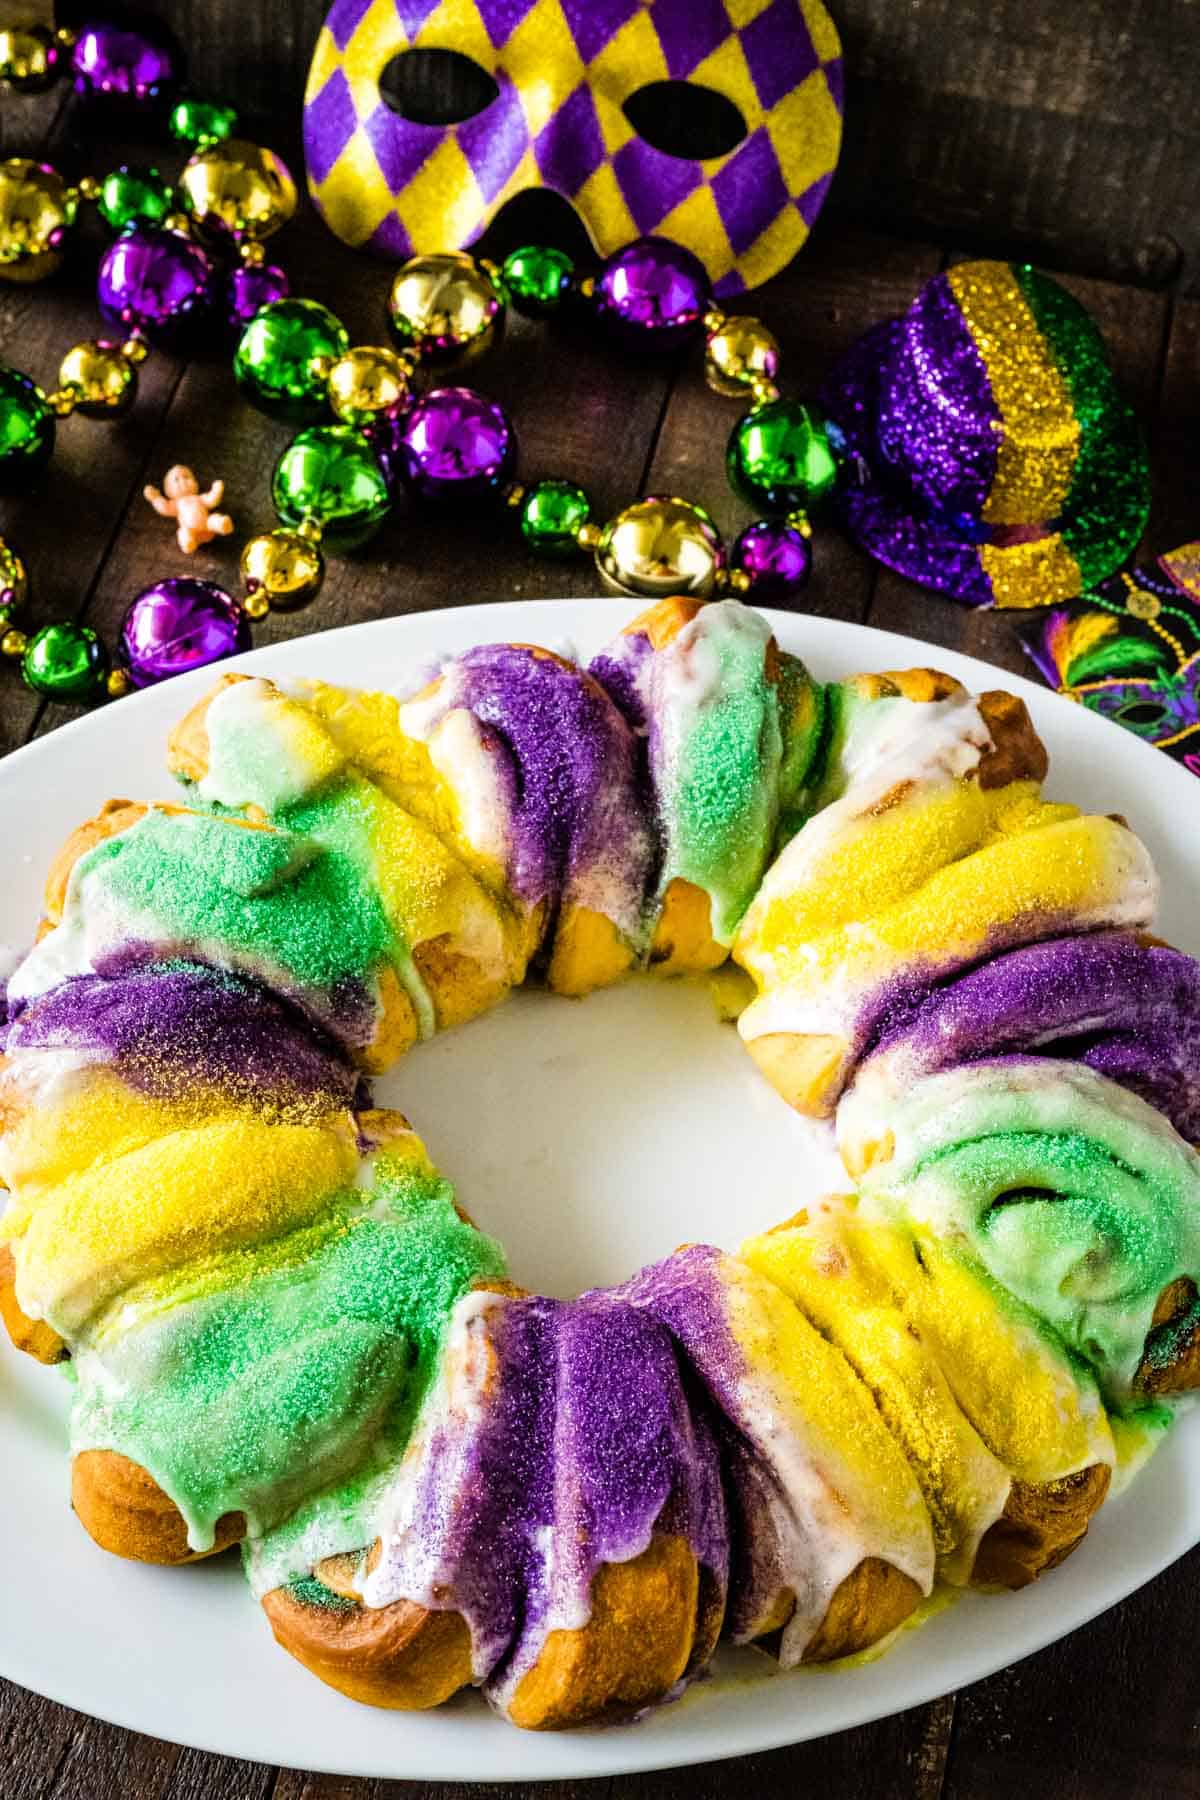 A king cake on a white oval platter set on a wooden table with mardi gras beads and a mask in the background for decoration.